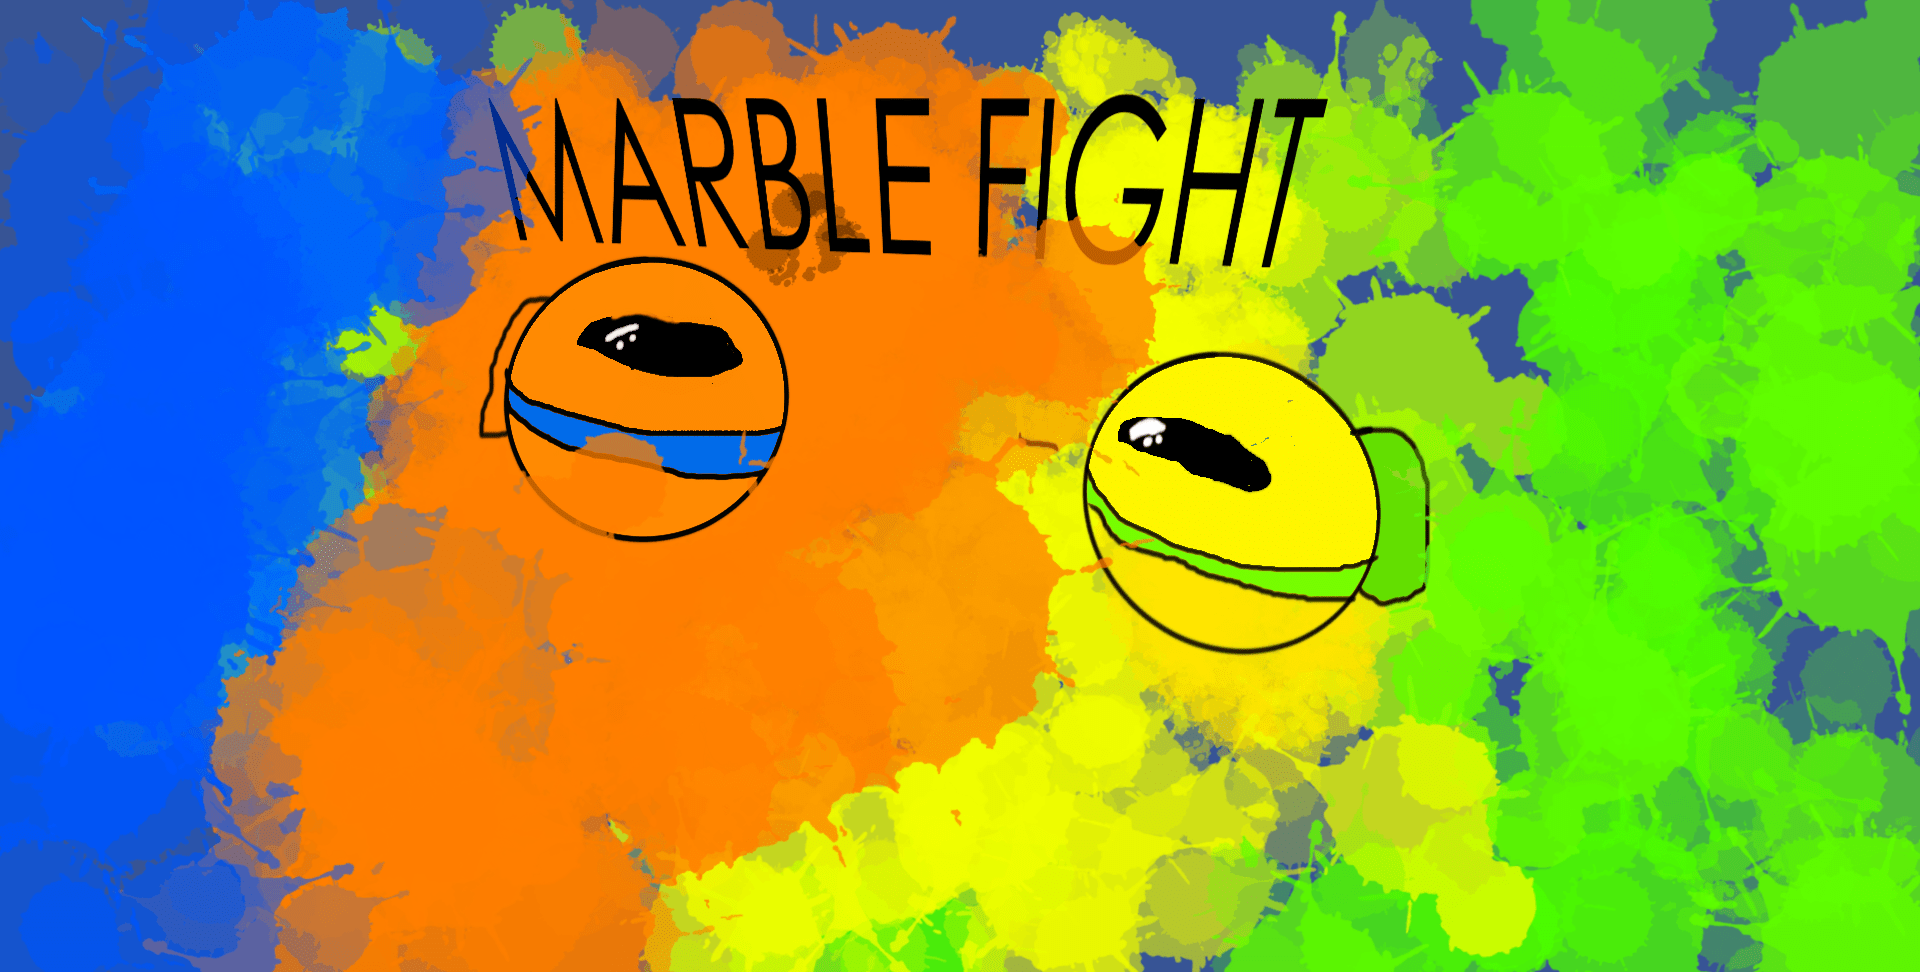 Marbles' Fight